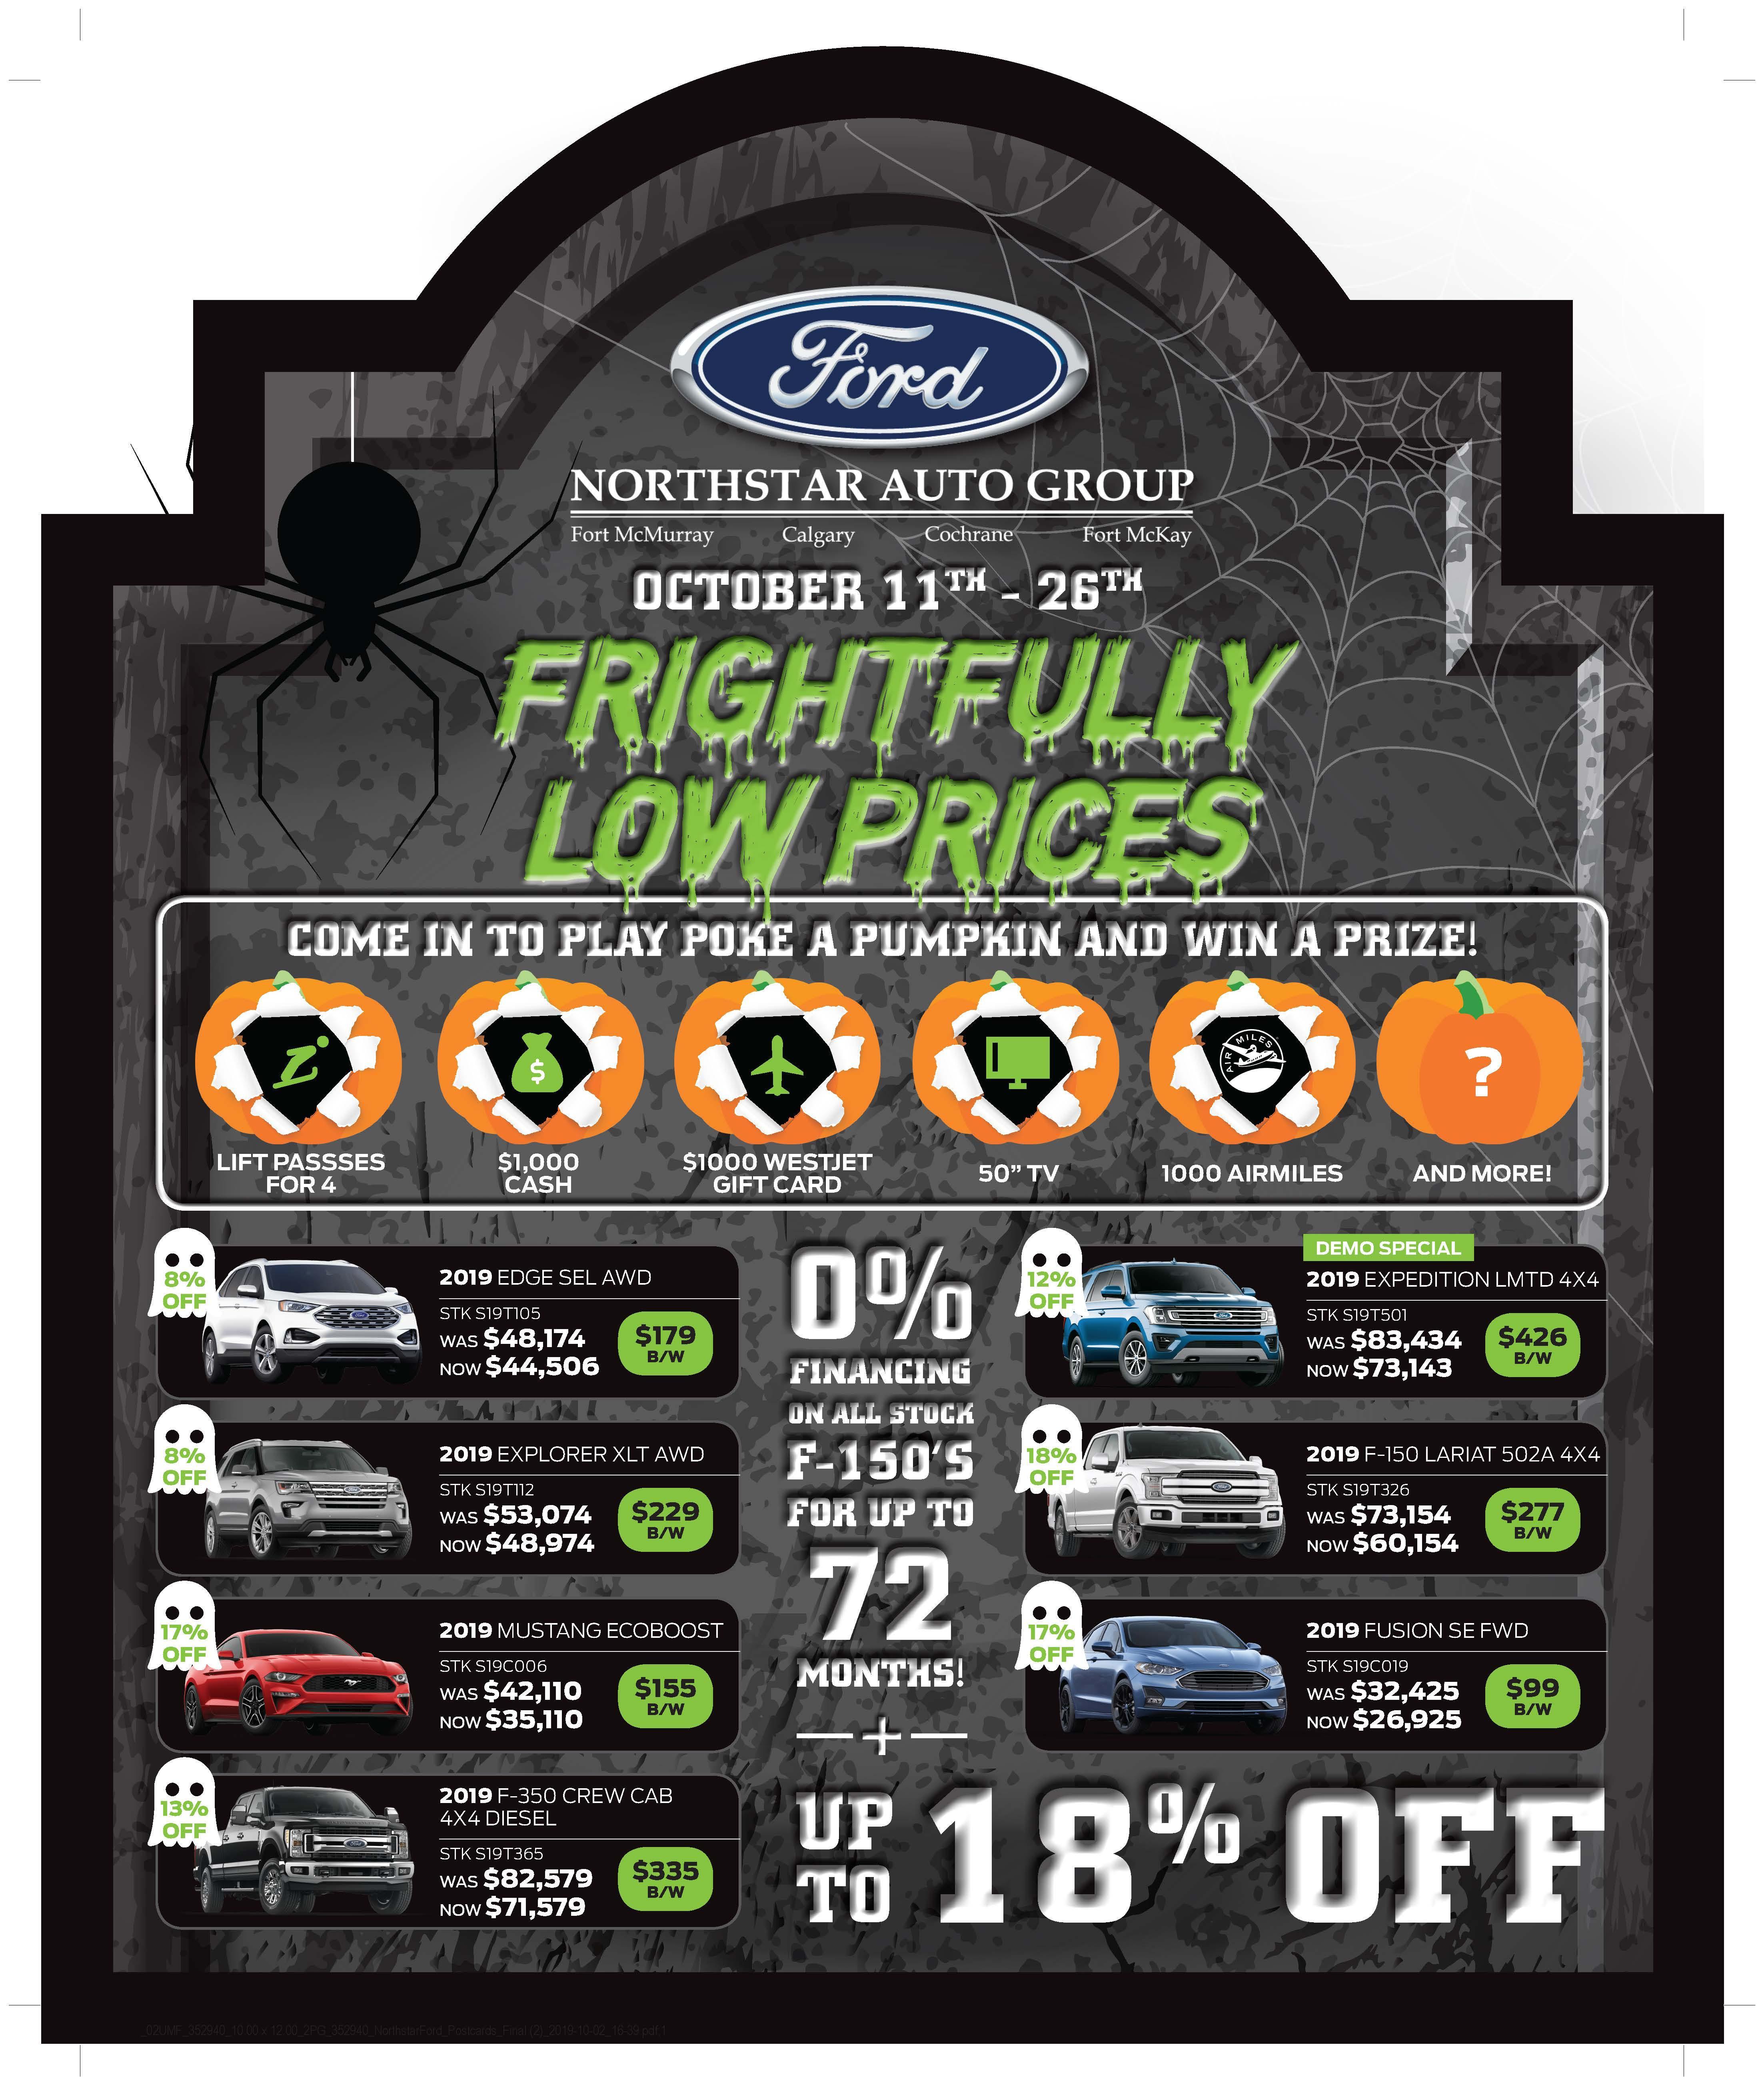 Ford Halloween Sale image